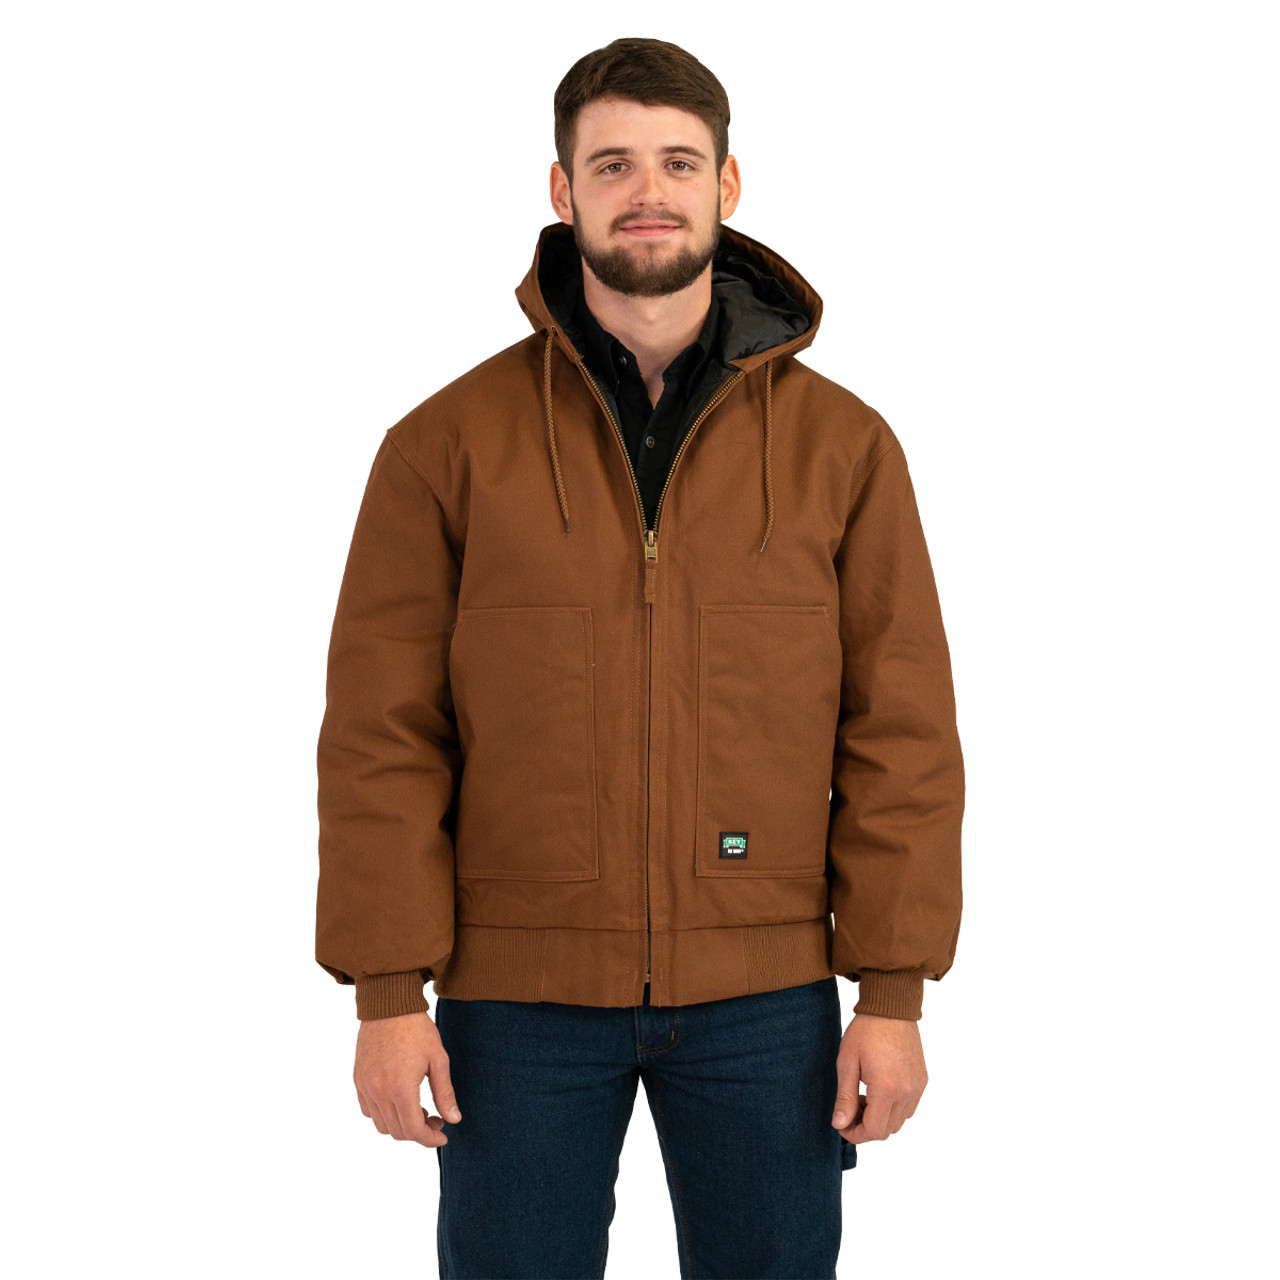 https://cdn11.bigcommerce.com/s-r4f6haoaux/images/stencil/1280x1280/products/178/2405/372-29-insulated-hooded-duck-jacket-saddle-KEY-model-front__99466.1683578896.jpg?c=1